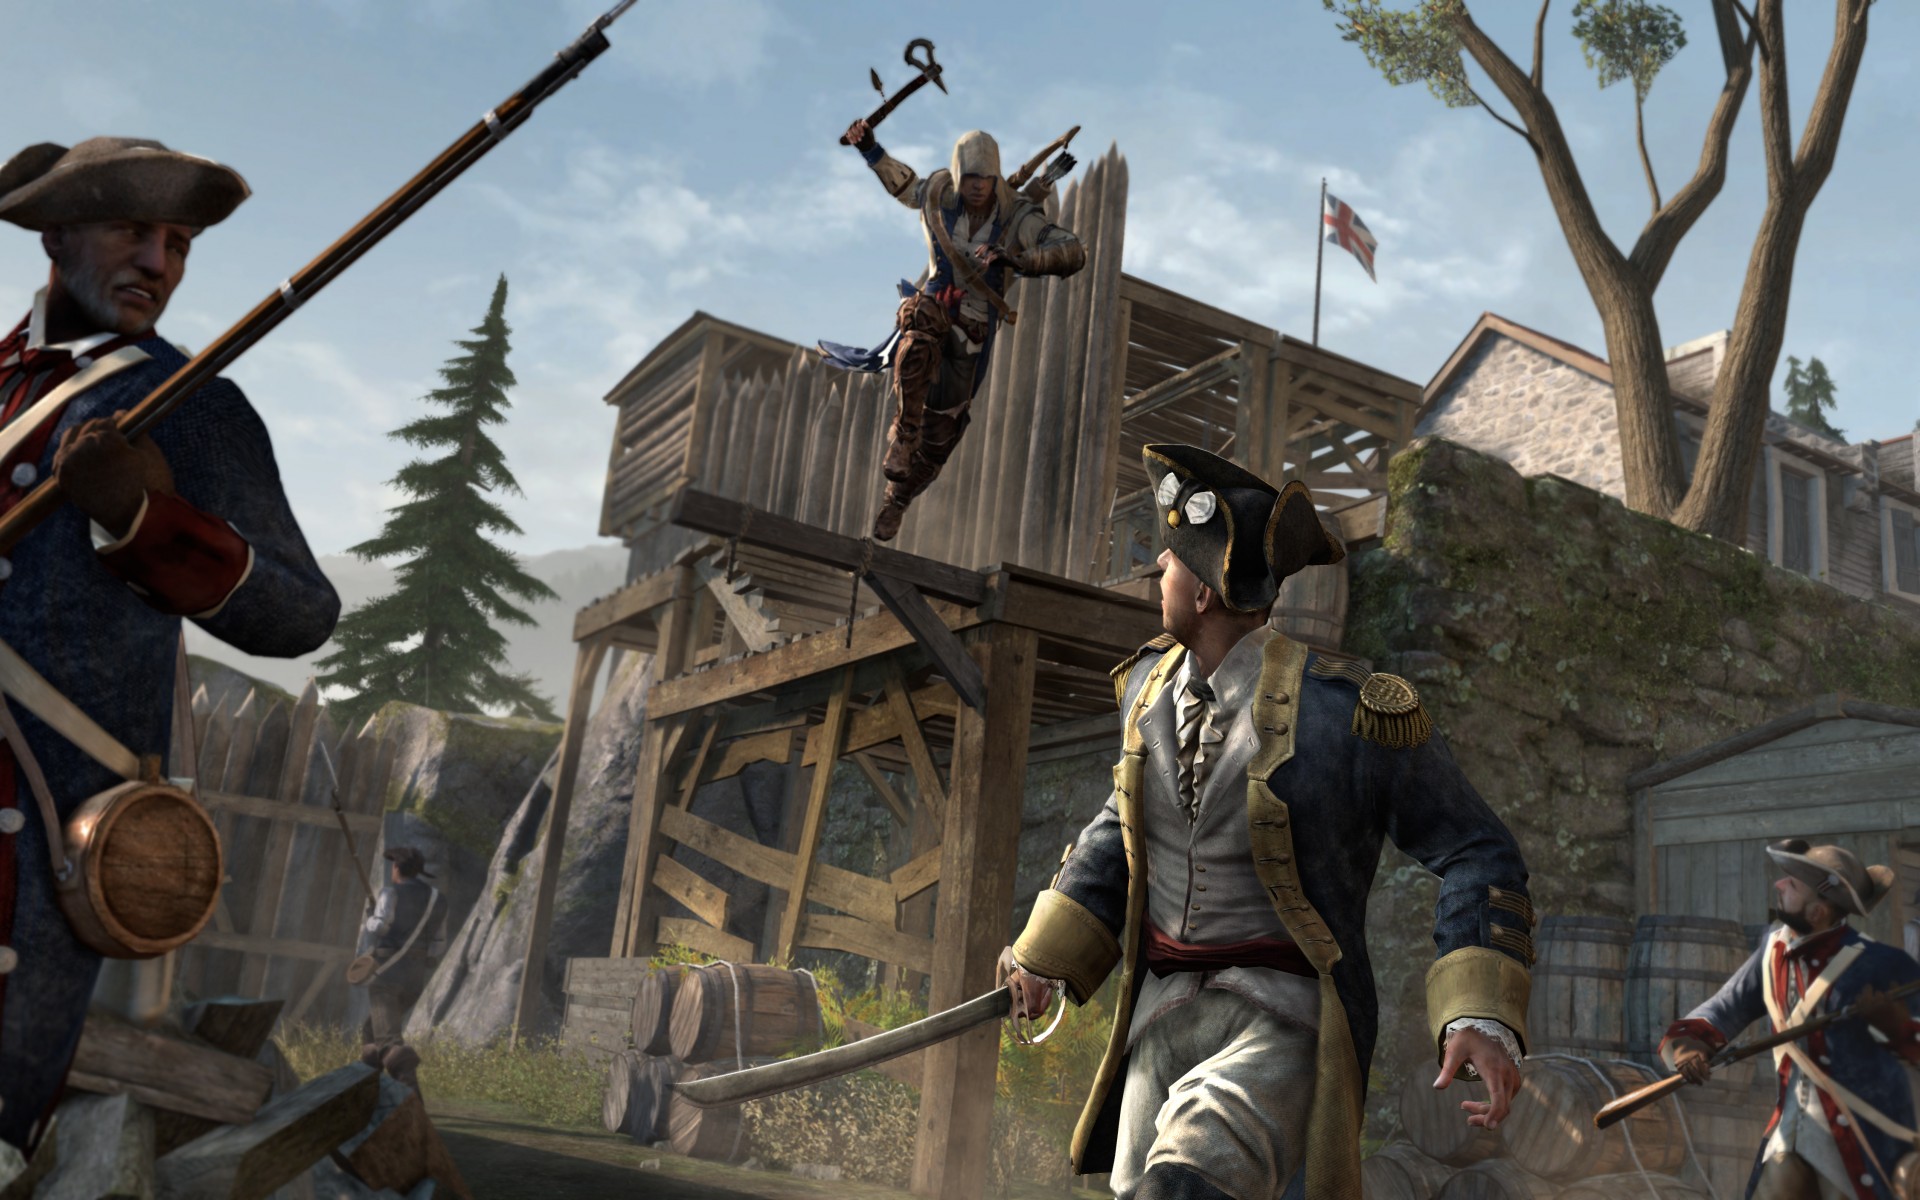 Games for 3 people. Assassin's Creed 3 геймплей. Assassin's Creed 3 Remastered. Ассасин 3 геймплей. Ассасин Крид 3 геймплей.